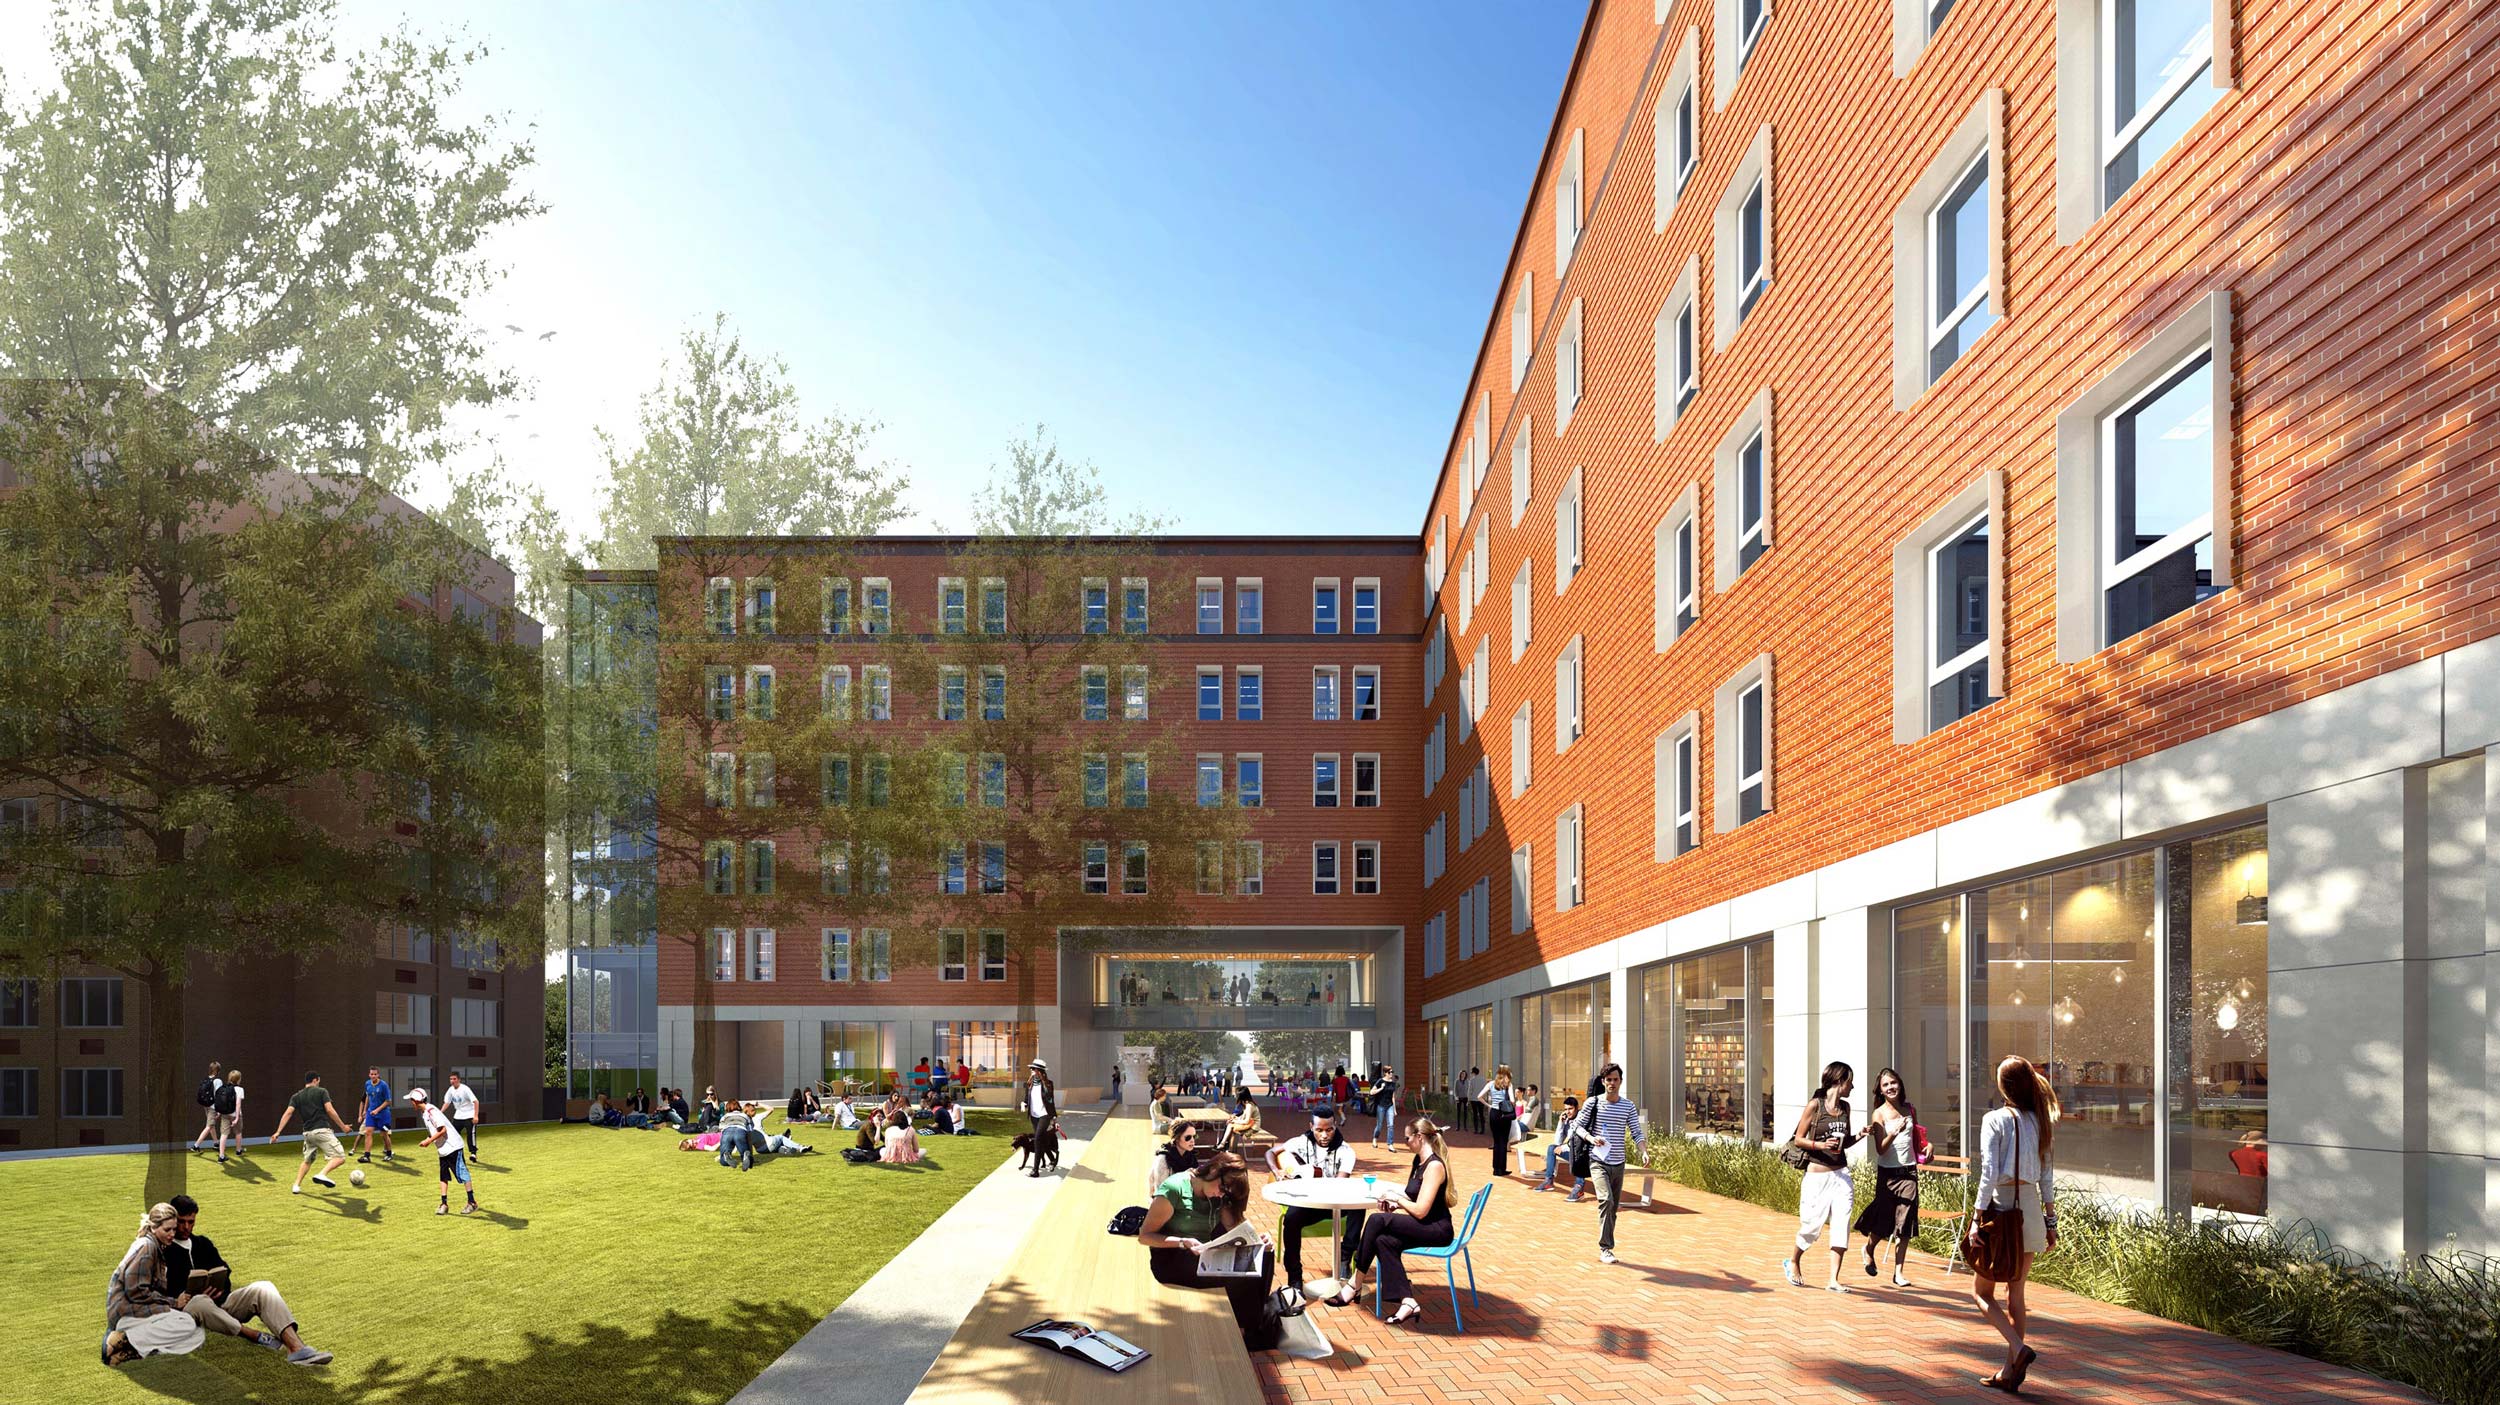 Bond House, a new upper-class student residence hall opening this fall, will serve as the anchor of a newly planned, sustainability-focused, student-centered neighborhood on Brandon Avenue. 